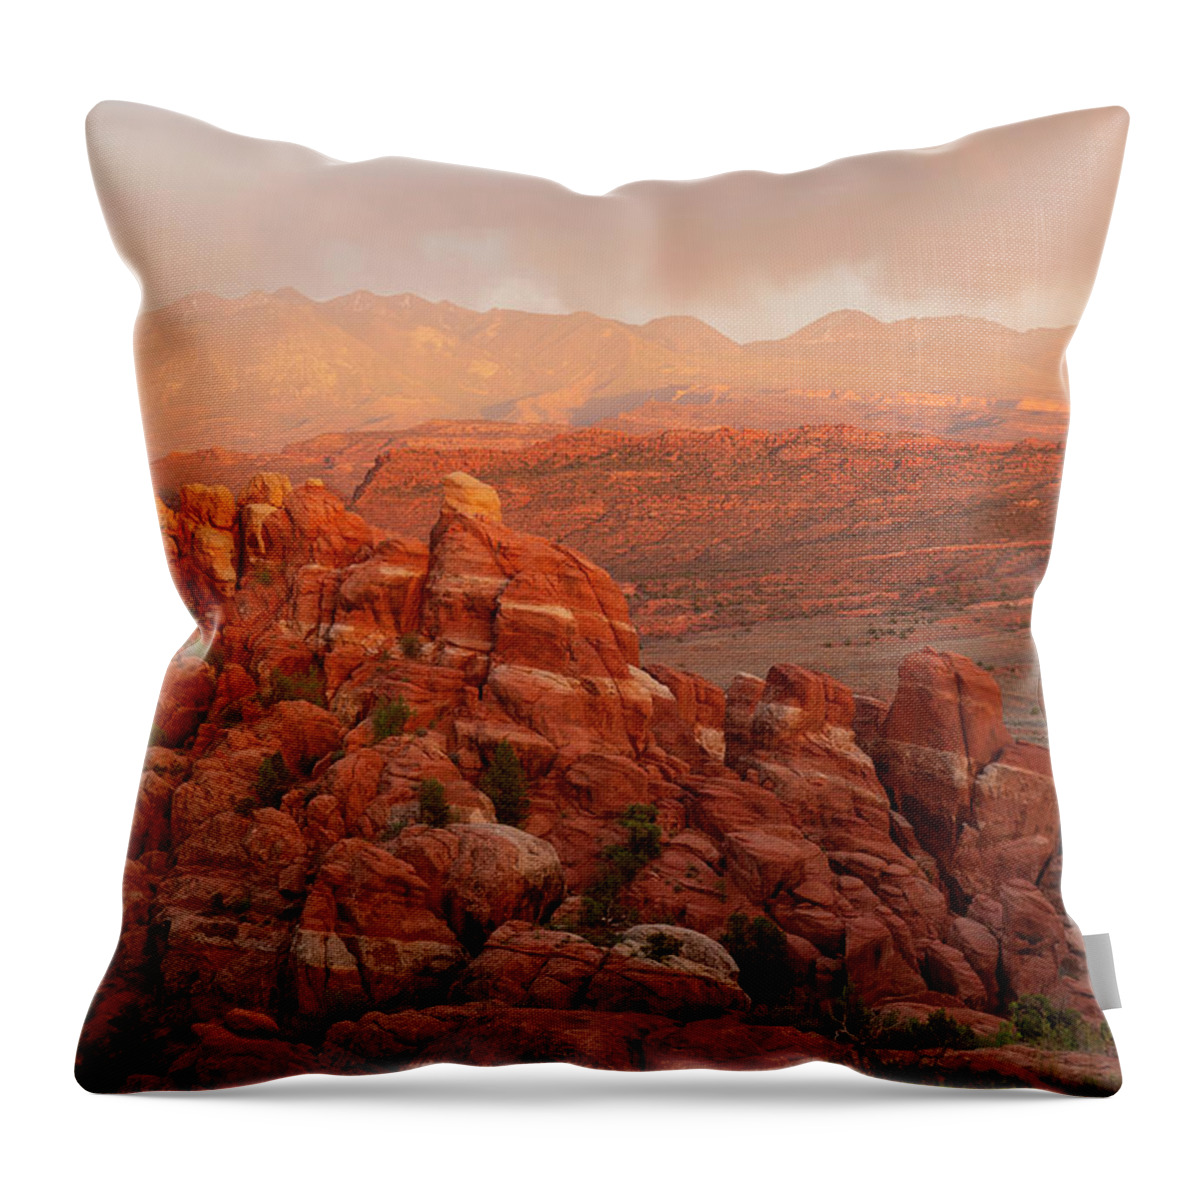 Fiery Furnace Throw Pillow featuring the photograph Fiery Furnace Sunset by Aaron Spong